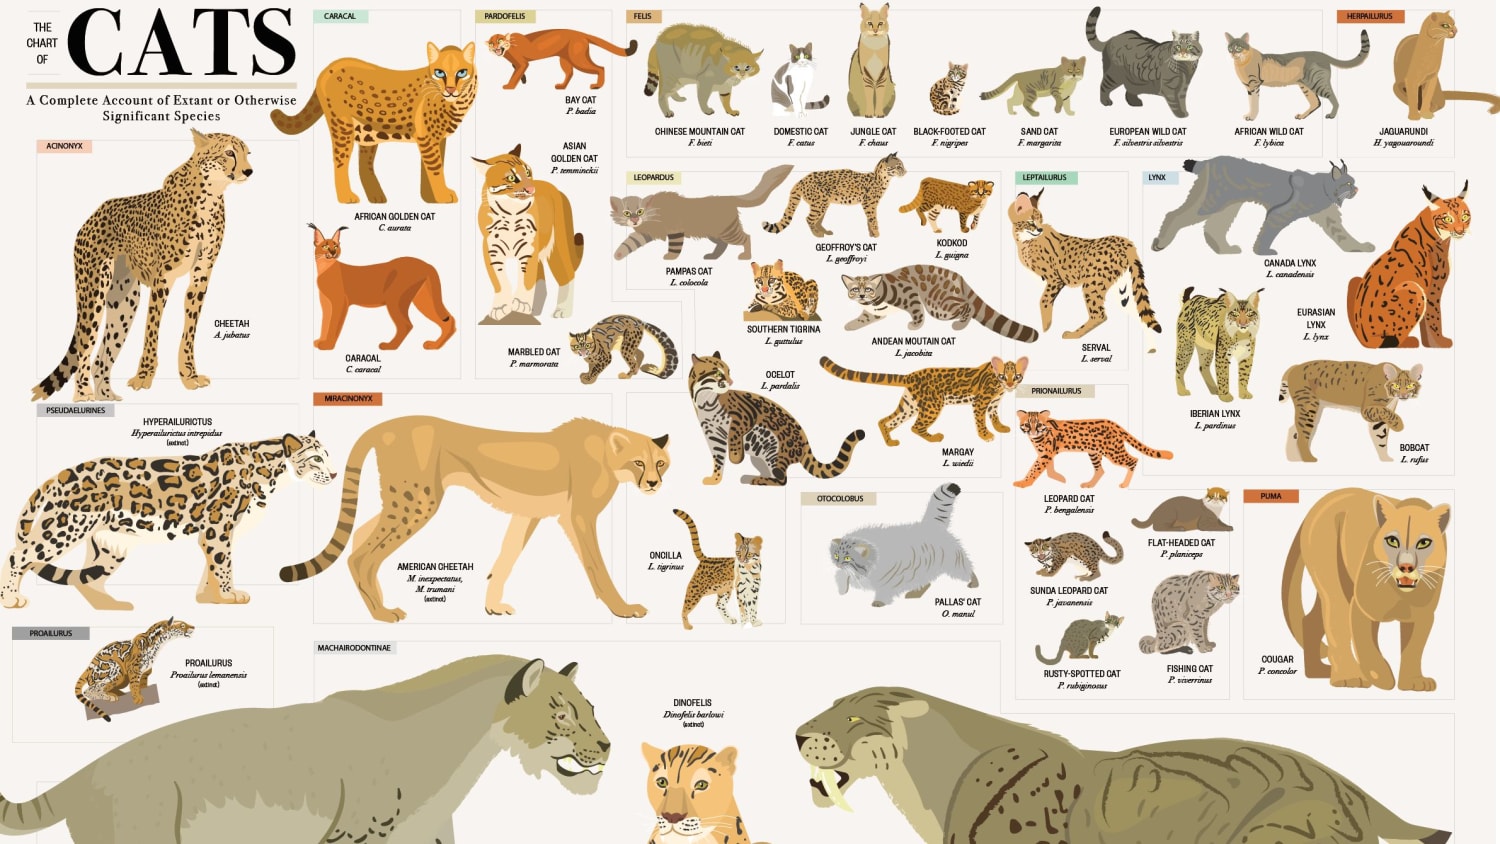 This Wall Chart Shows Every Species in the Cat Kingdom